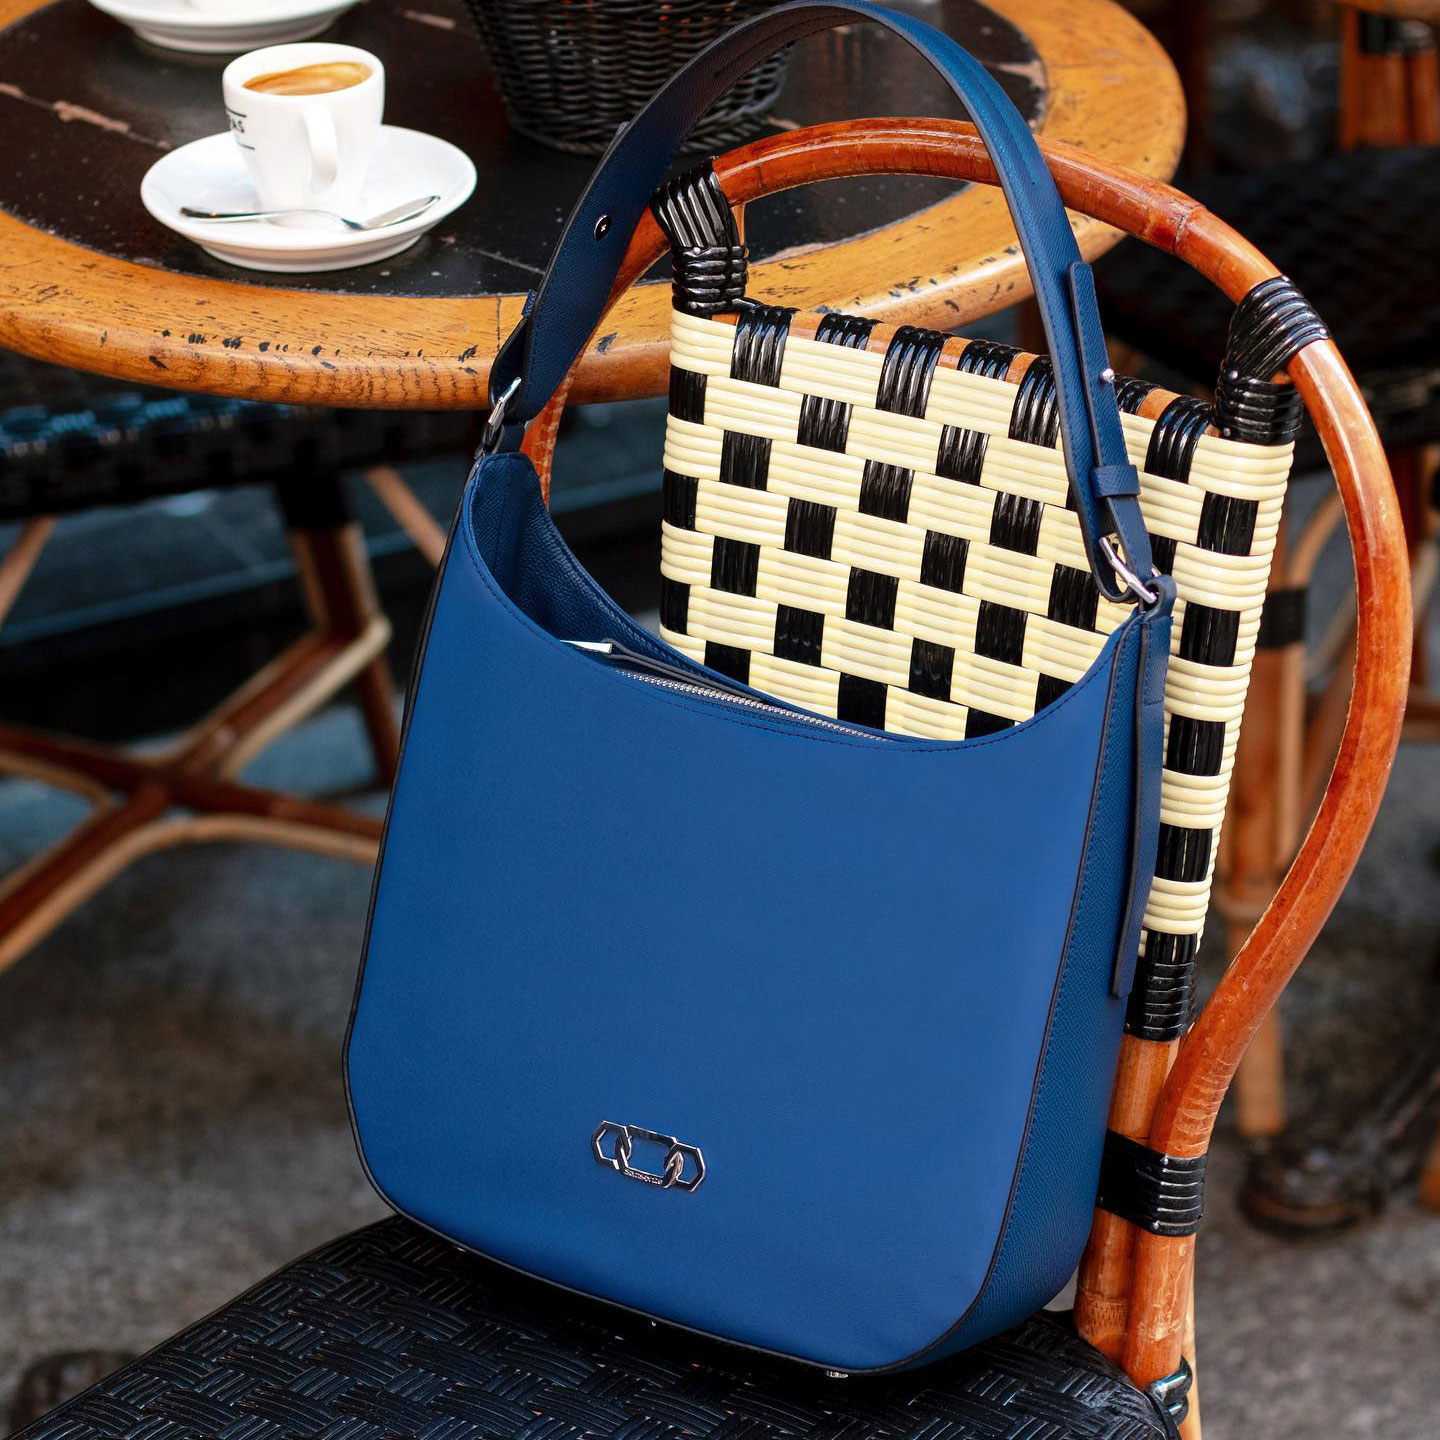 The SS22 collections of Samsonite handbags in the name of functionality and sweet colors